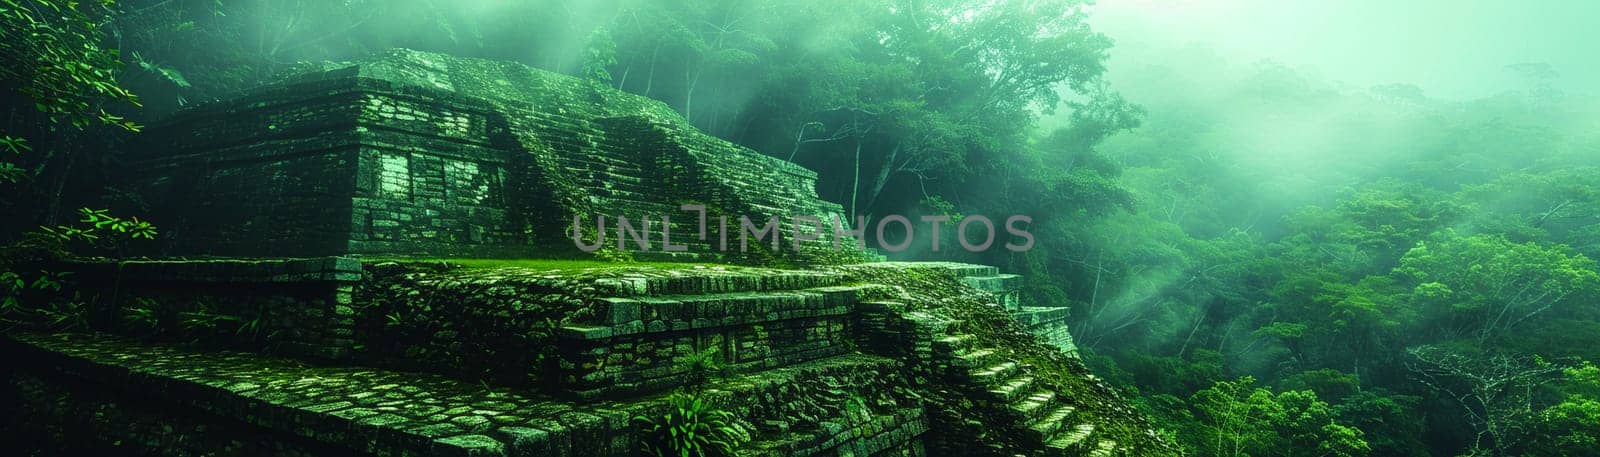 Mayan Pyramid Edges Blurring into a Jungle Canopy The structures silhouette merges with the foliage by Benzoix